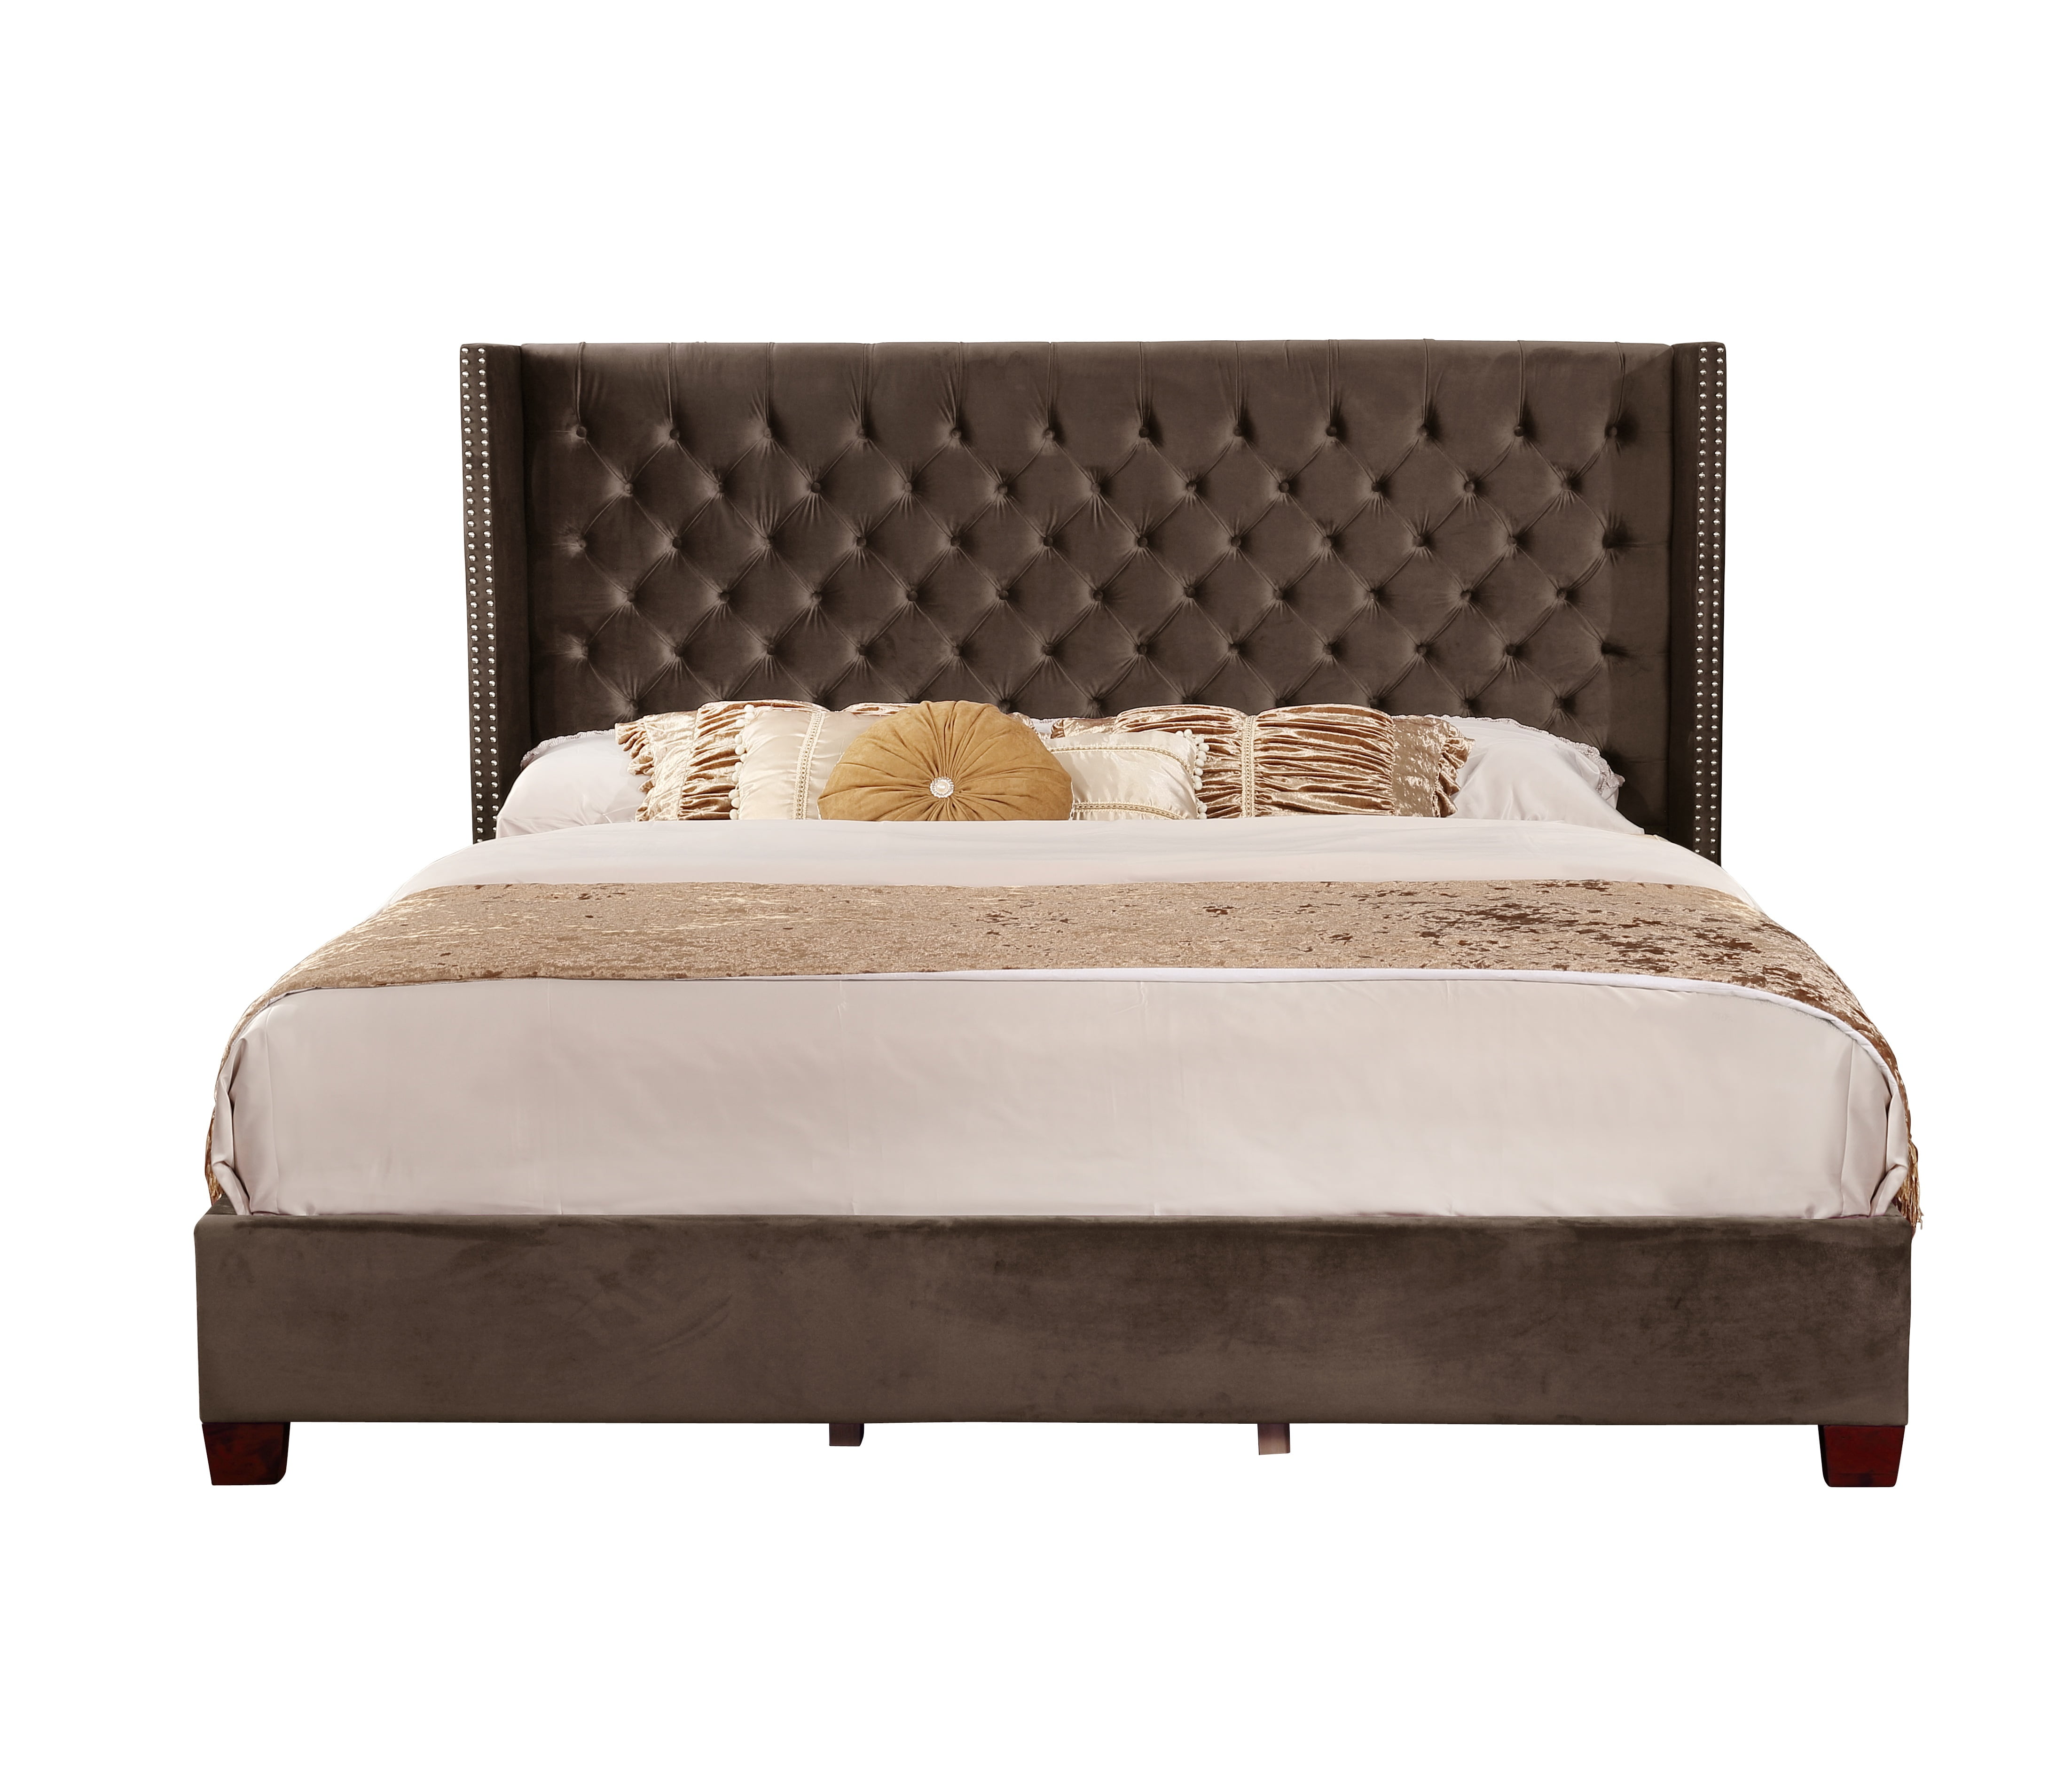 King Size On Tufted Wingback Bed, King Size Wingback Upholstered Bed